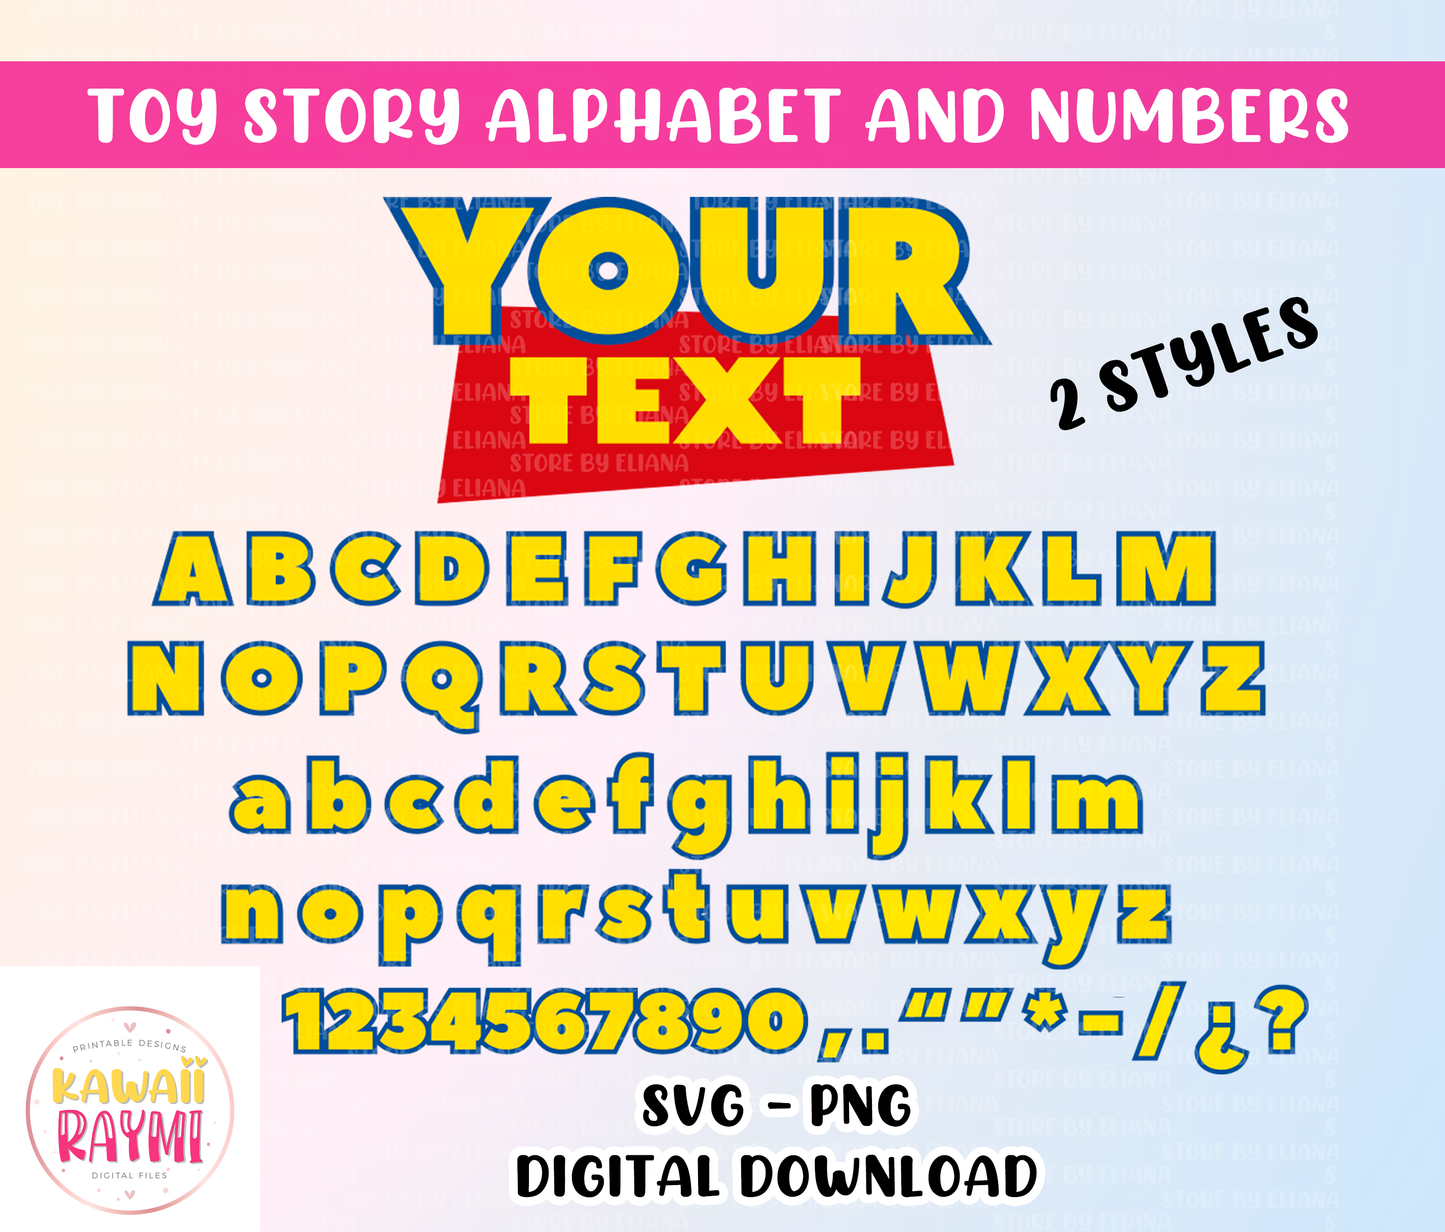 Toy story font svg, toy story alphabet and numbers svg, png, cricut, cut file, instant download